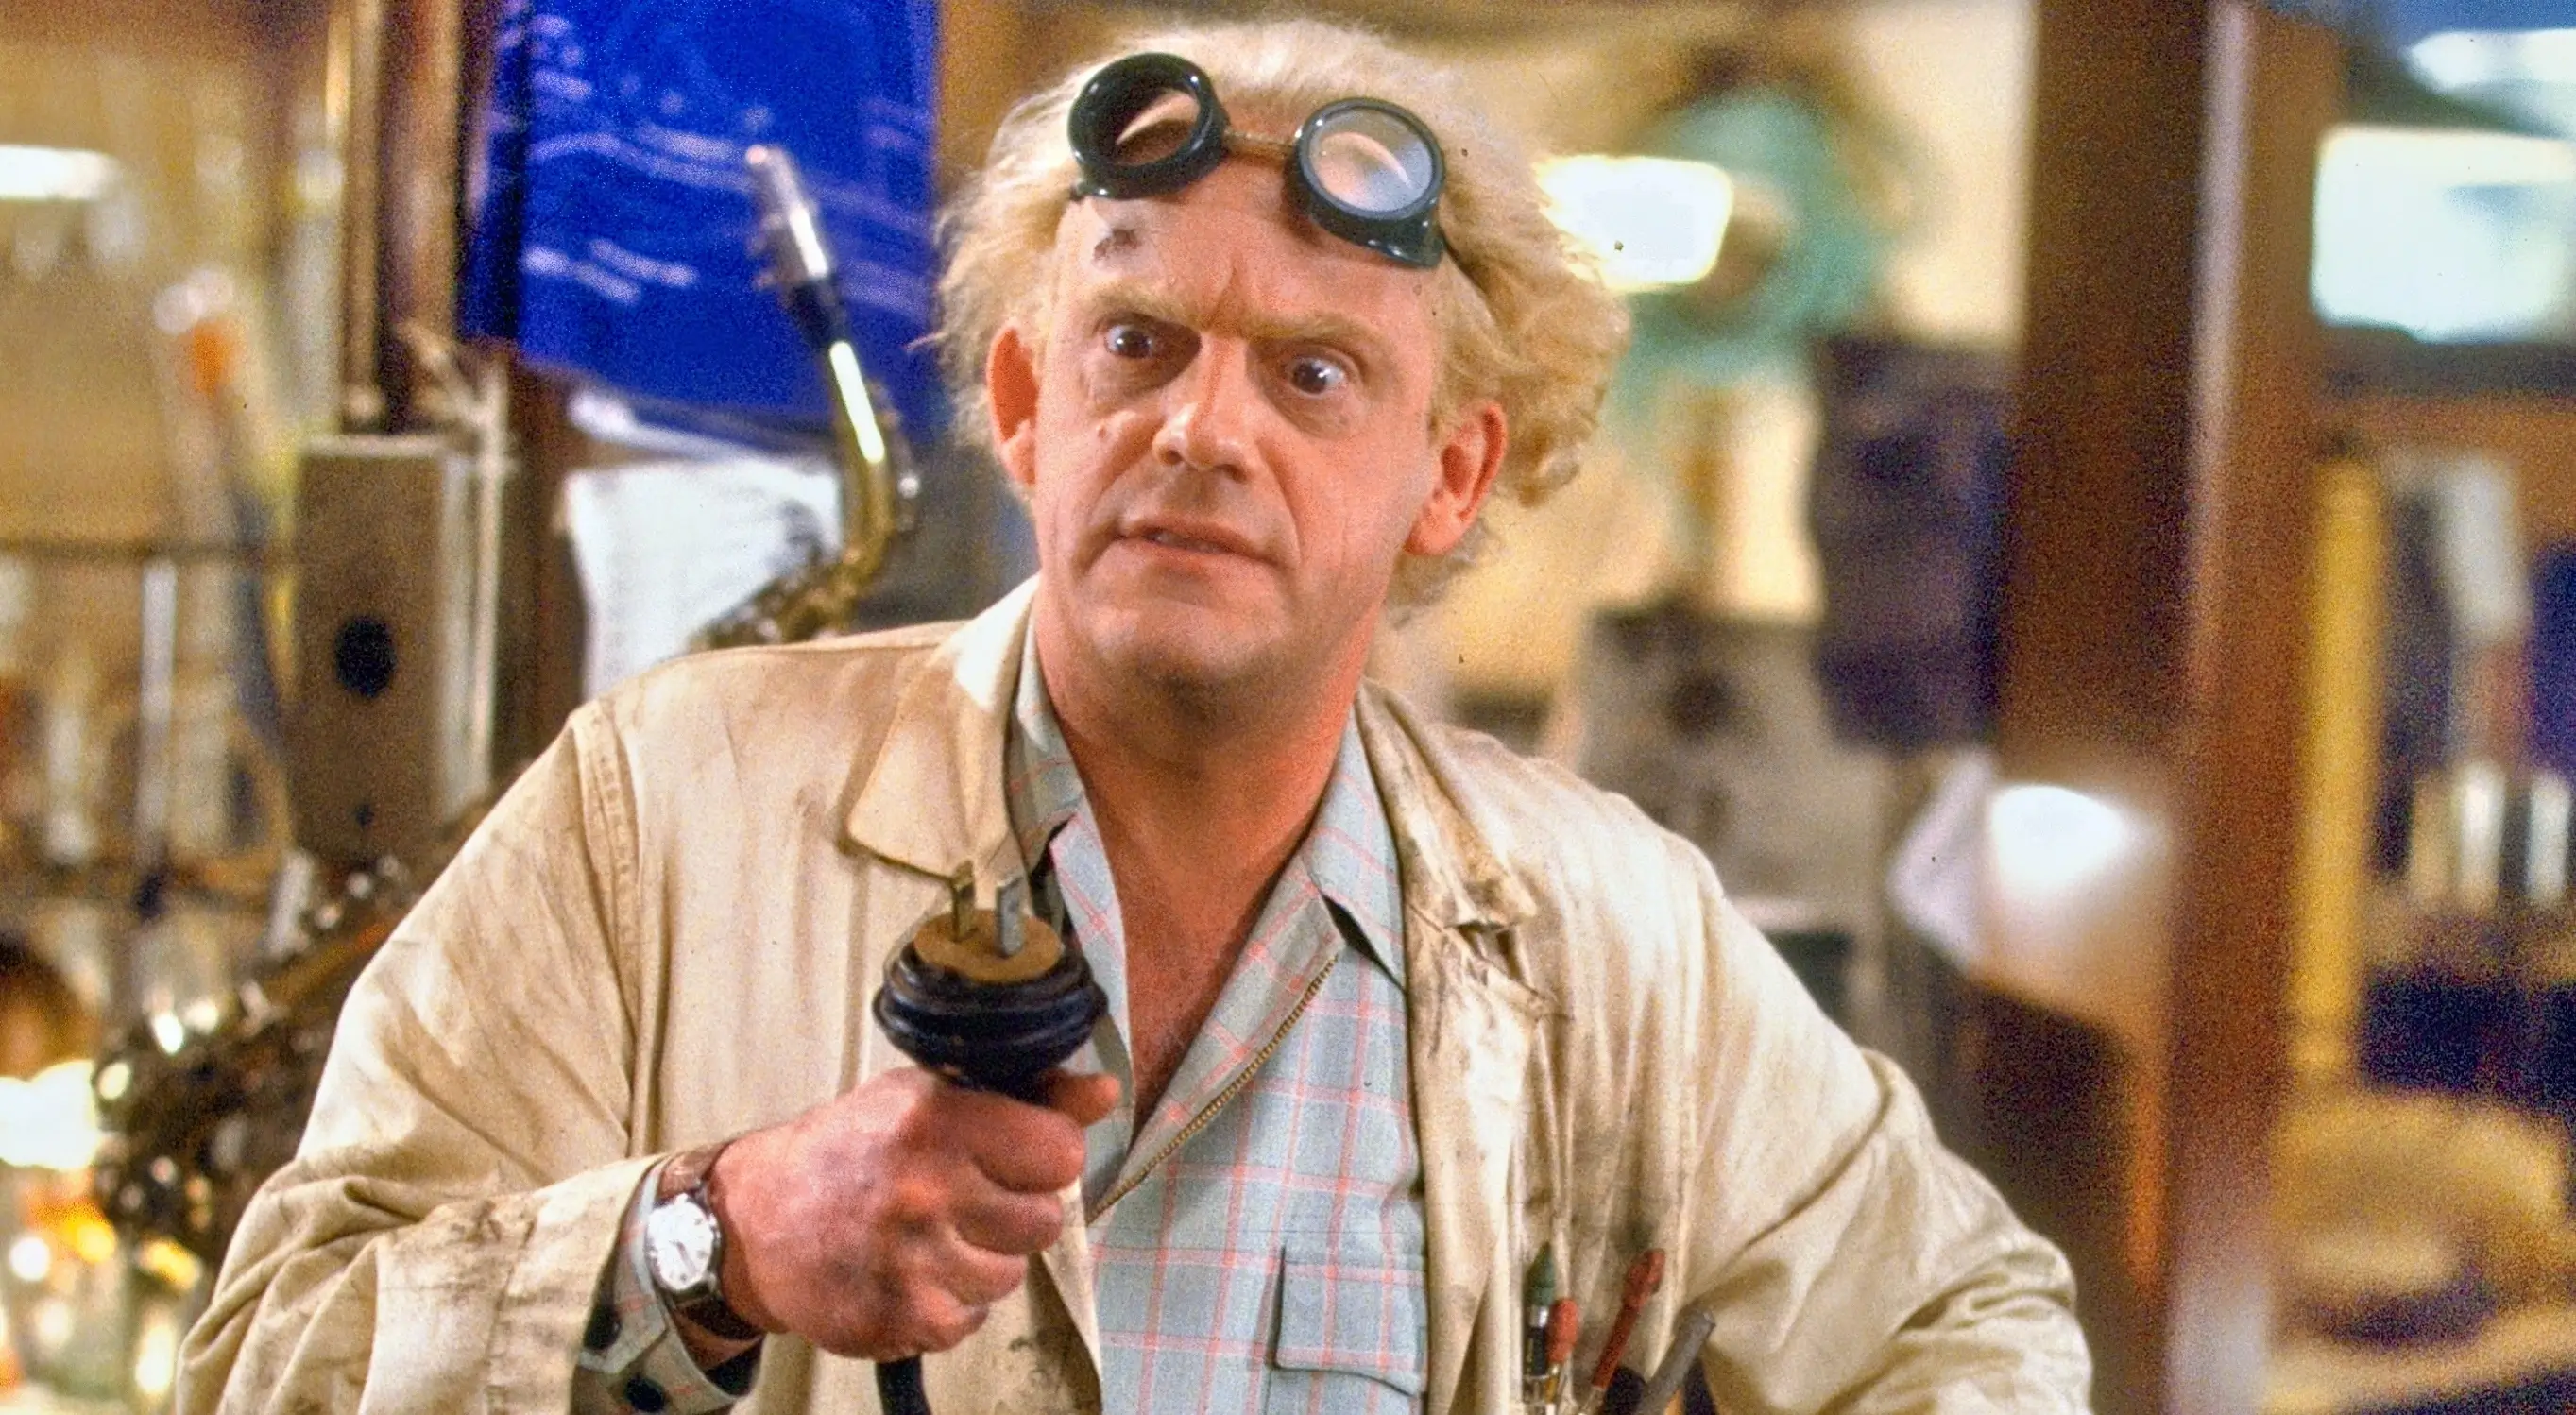 A film still of Doc Brown from Back to the Future, a frizzy-haired scientist holding a cable